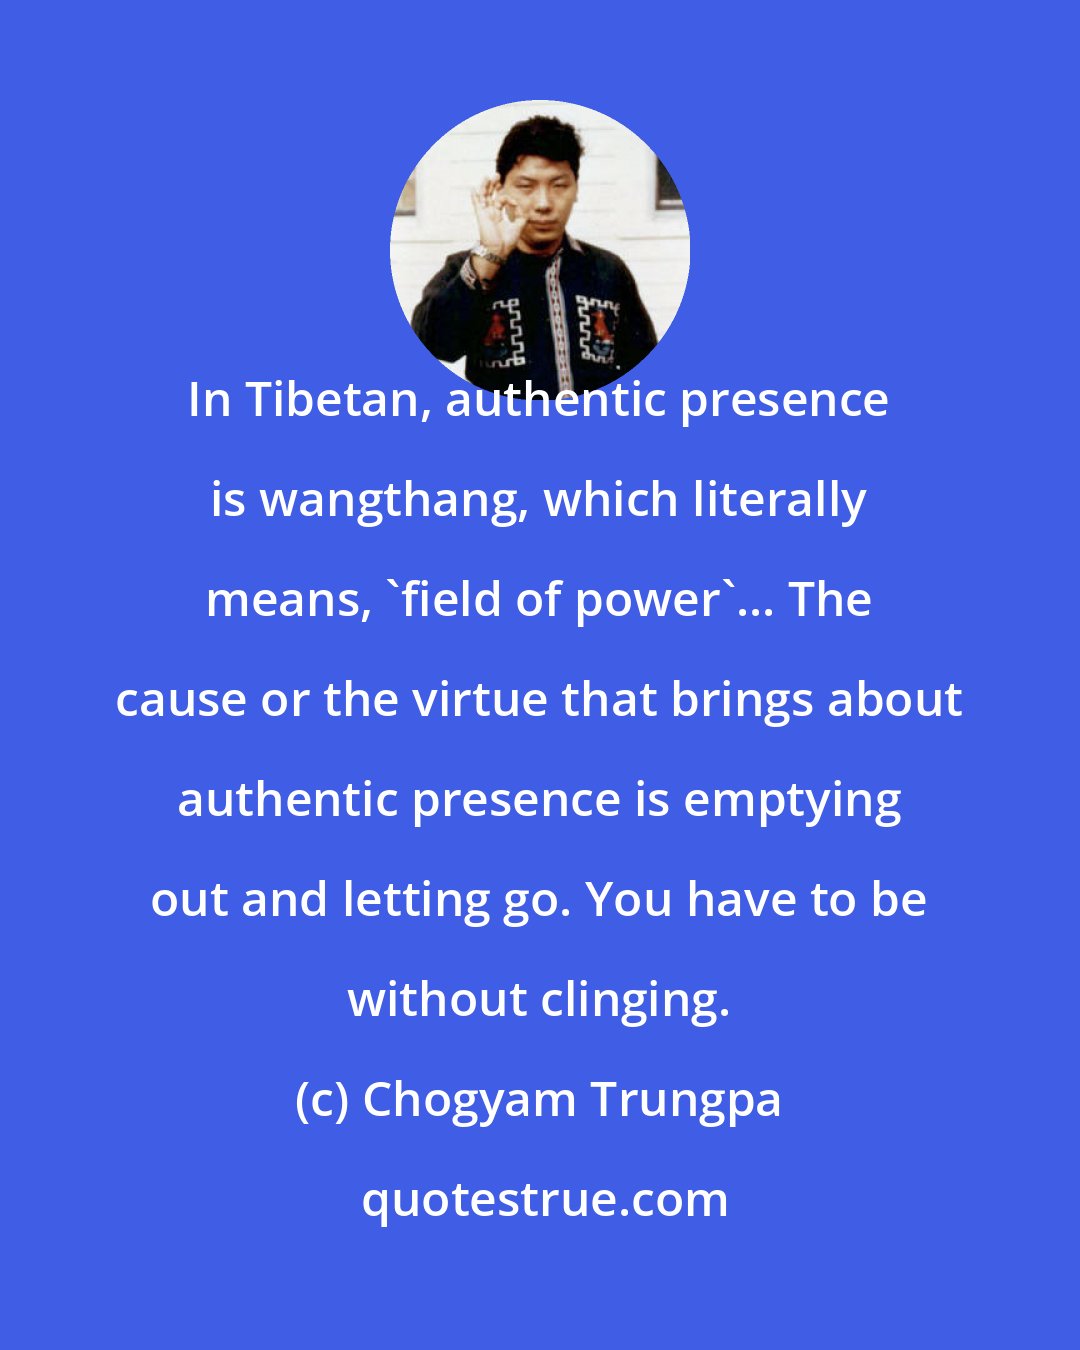 Chogyam Trungpa: In Tibetan, authentic presence is wangthang, which literally means, 'field of power'... The cause or the virtue that brings about authentic presence is emptying out and letting go. You have to be without clinging.